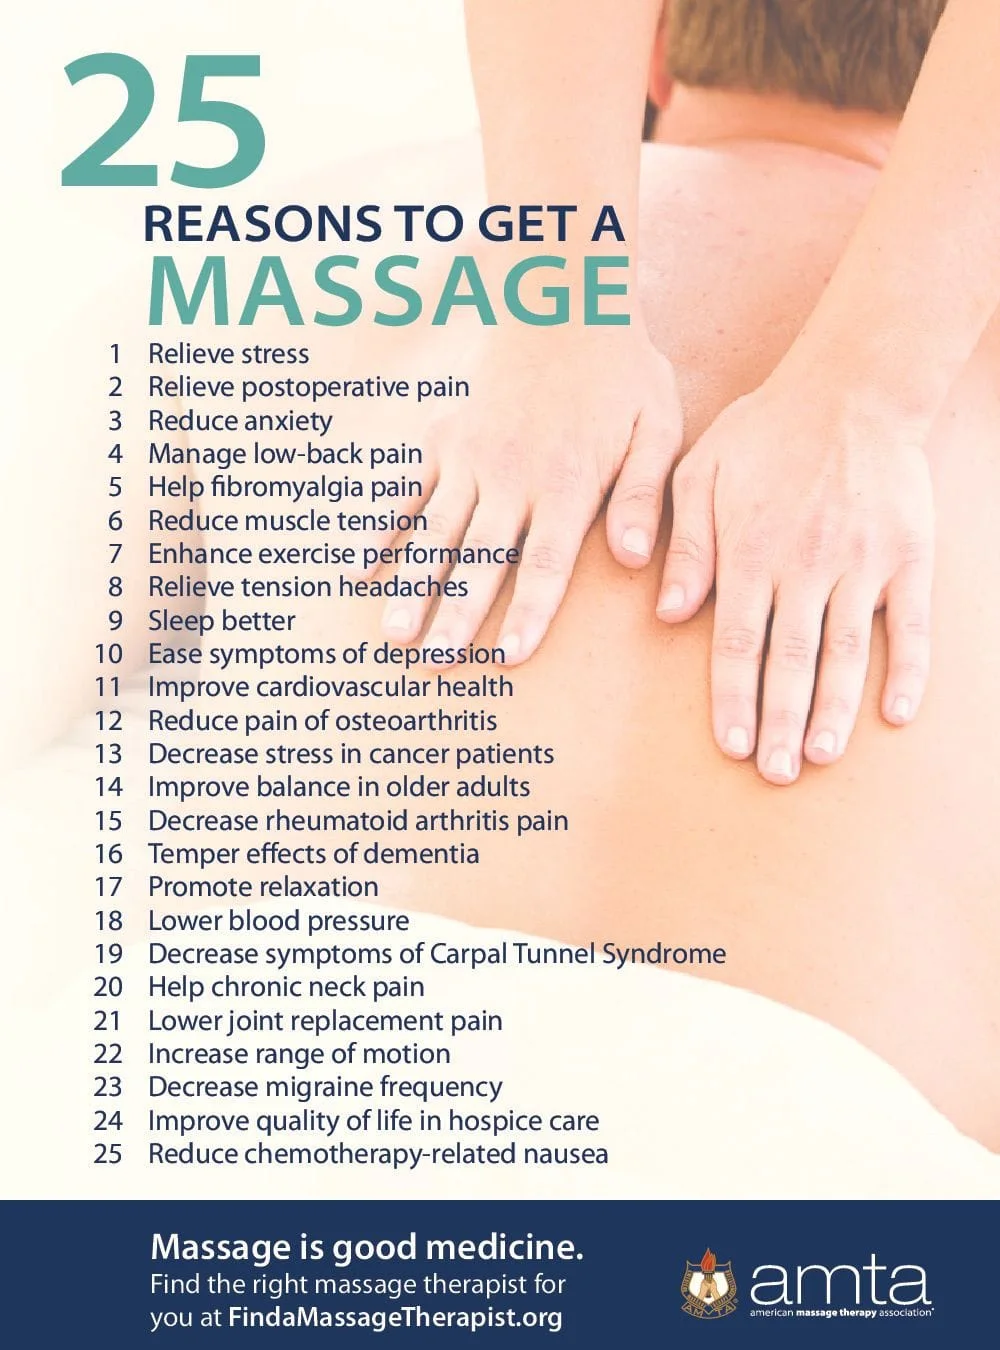 25 reasons to get a massage